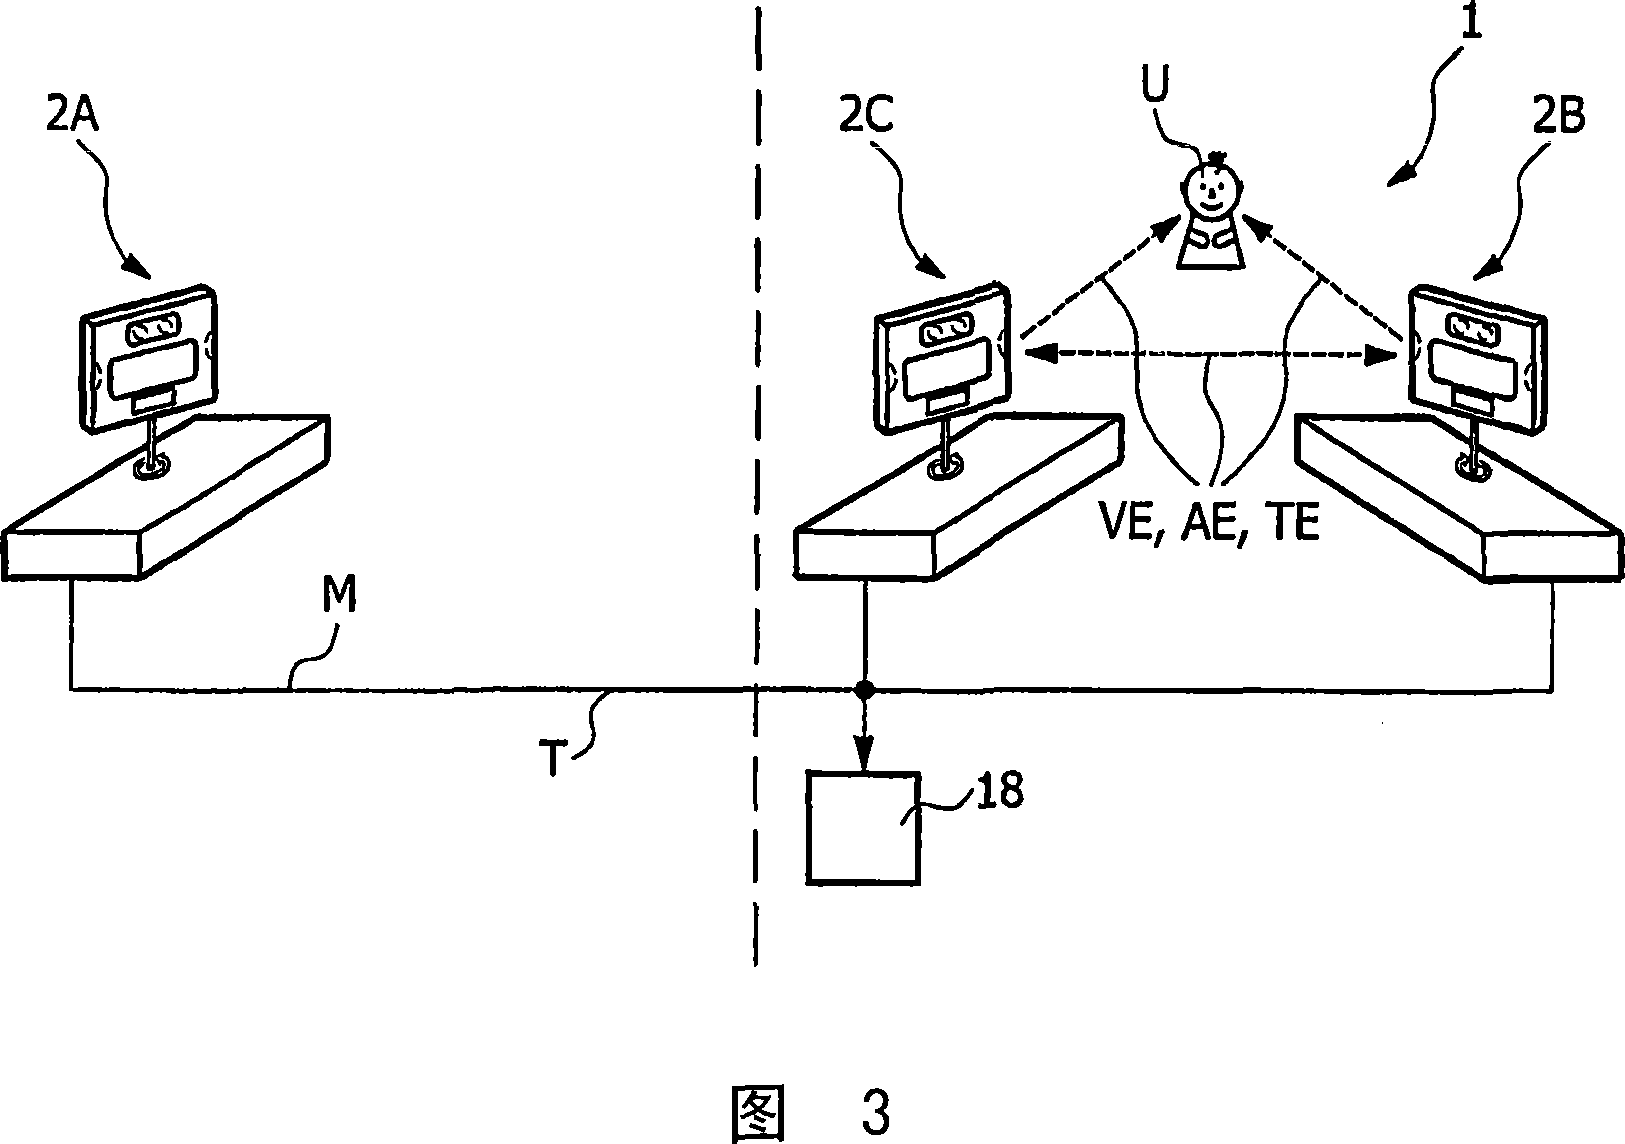 A method for contesting at least two interactive systems against each other and an interactive system competition arrangement